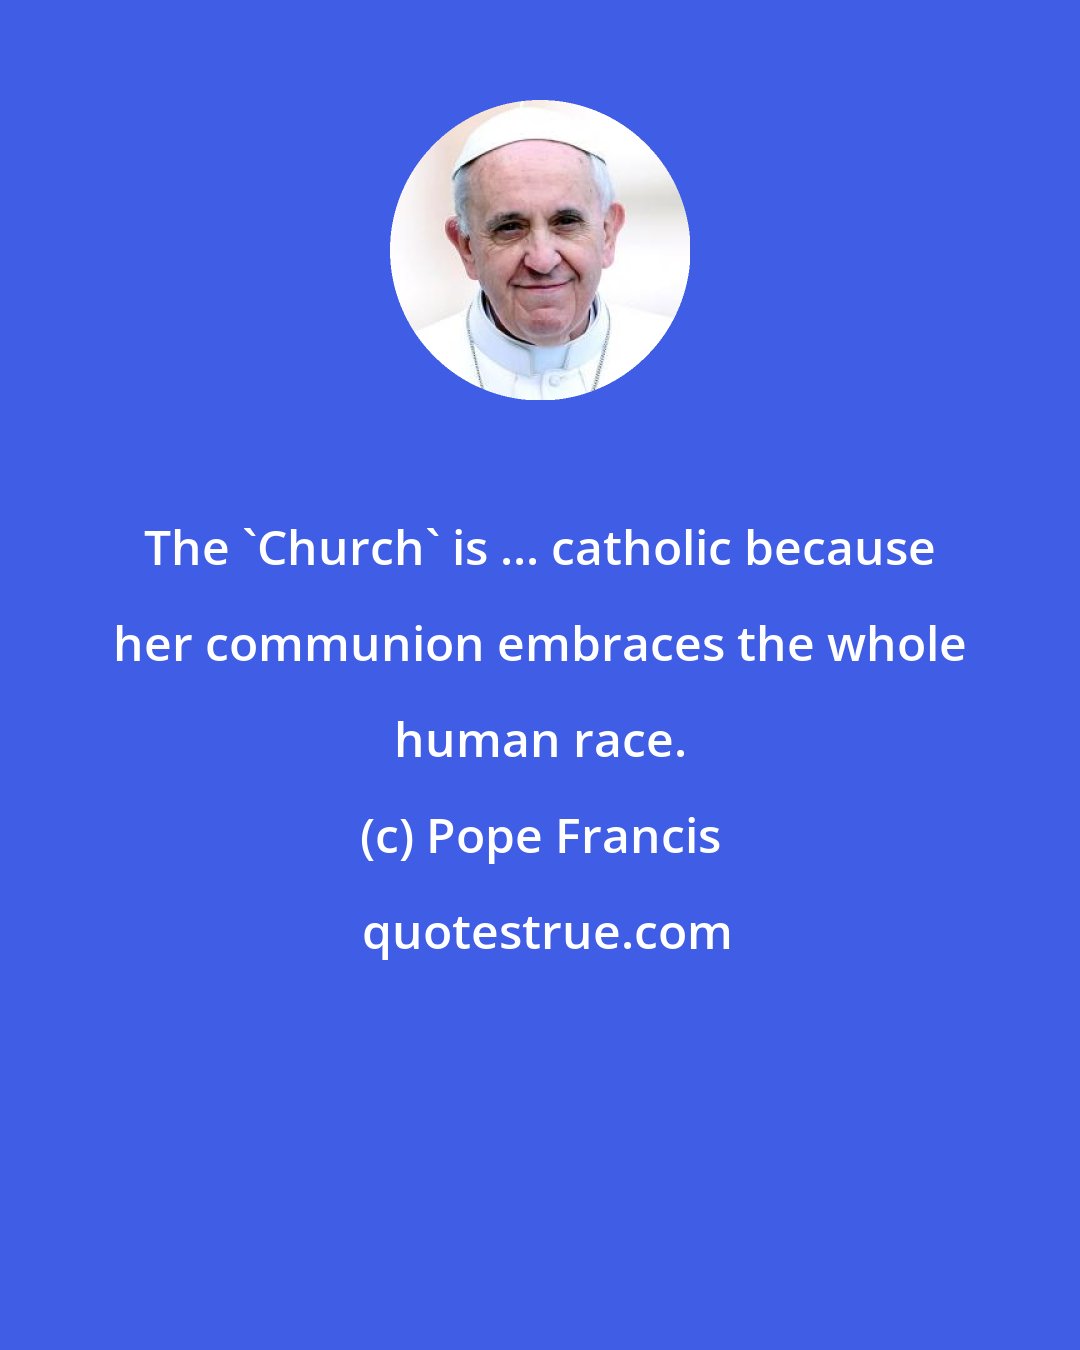 Pope Francis: The 'Church' is ... catholic because her communion embraces the whole human race.